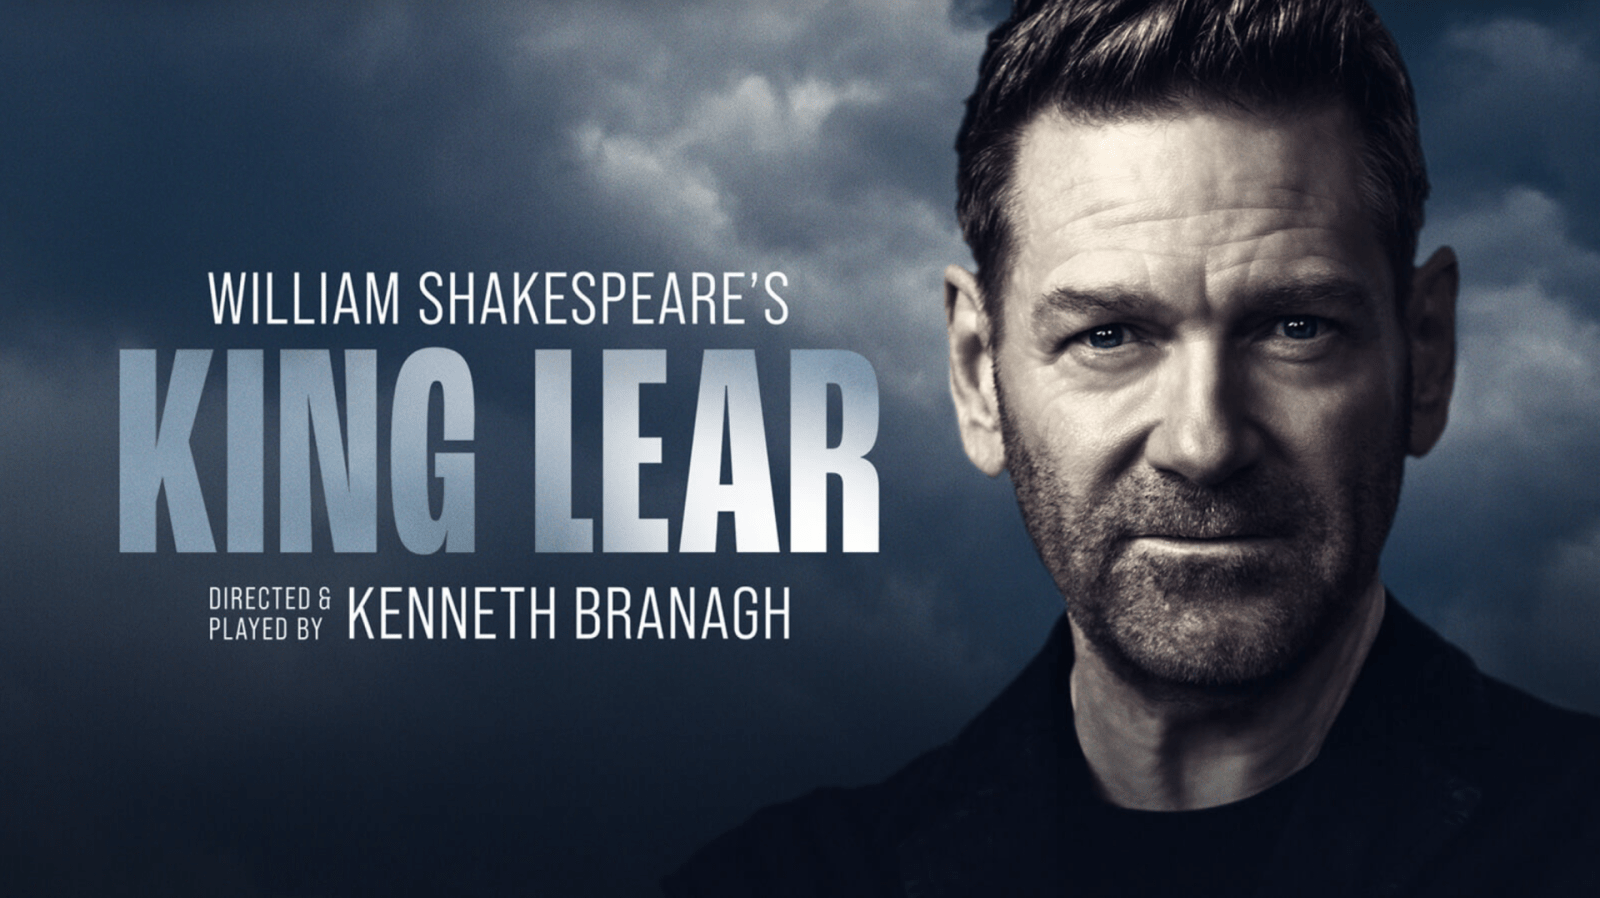 Kenneth Branagh will direct and play the title role in King Lear for 50 performances only at Wyndham’s Theatre from 21 October.